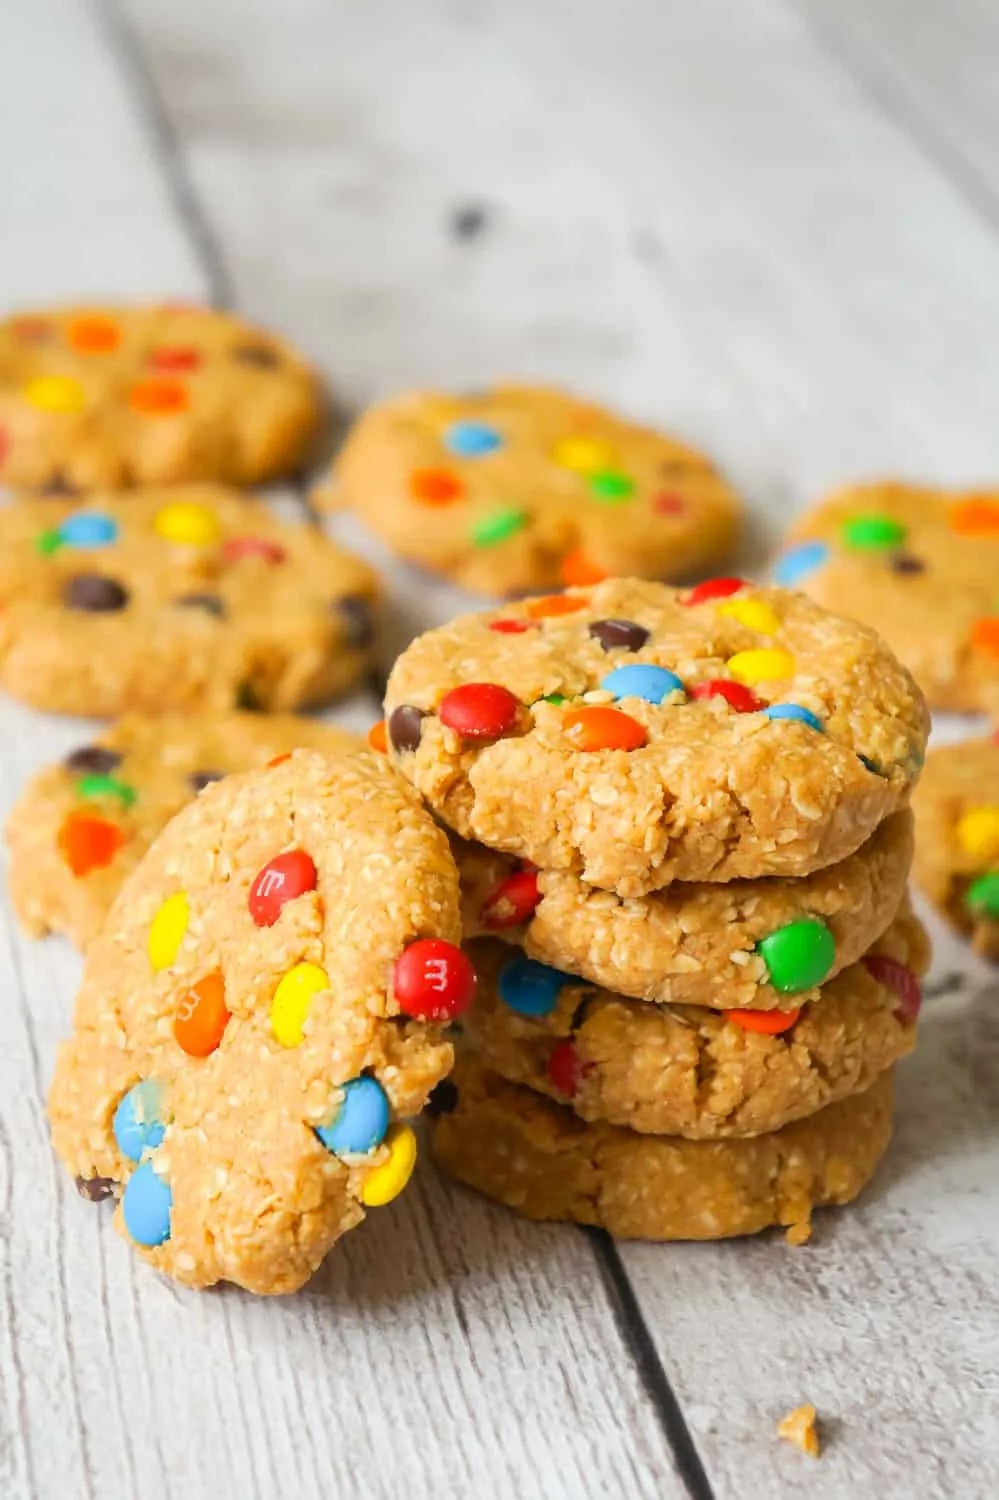 No Bake Monster Cookies are an easy peanut butter dessert recipe perfect for when you don't feel like turning on the oven. These no bake oatmeal peanut cookies are loaded with mini M&M's.